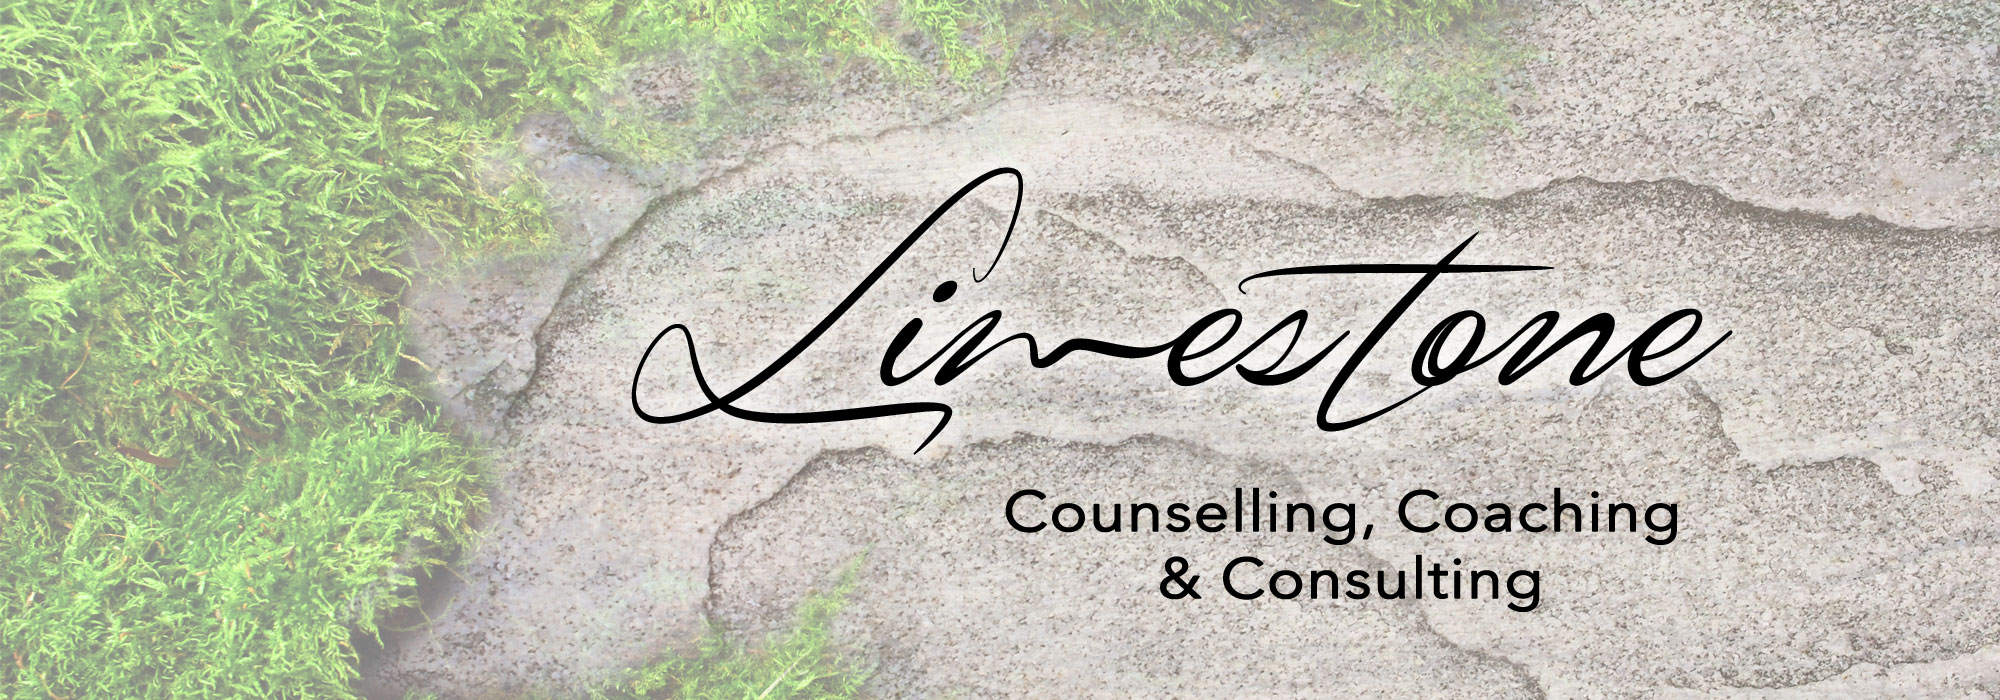 Limestone Counselling, Coaching & Consulting